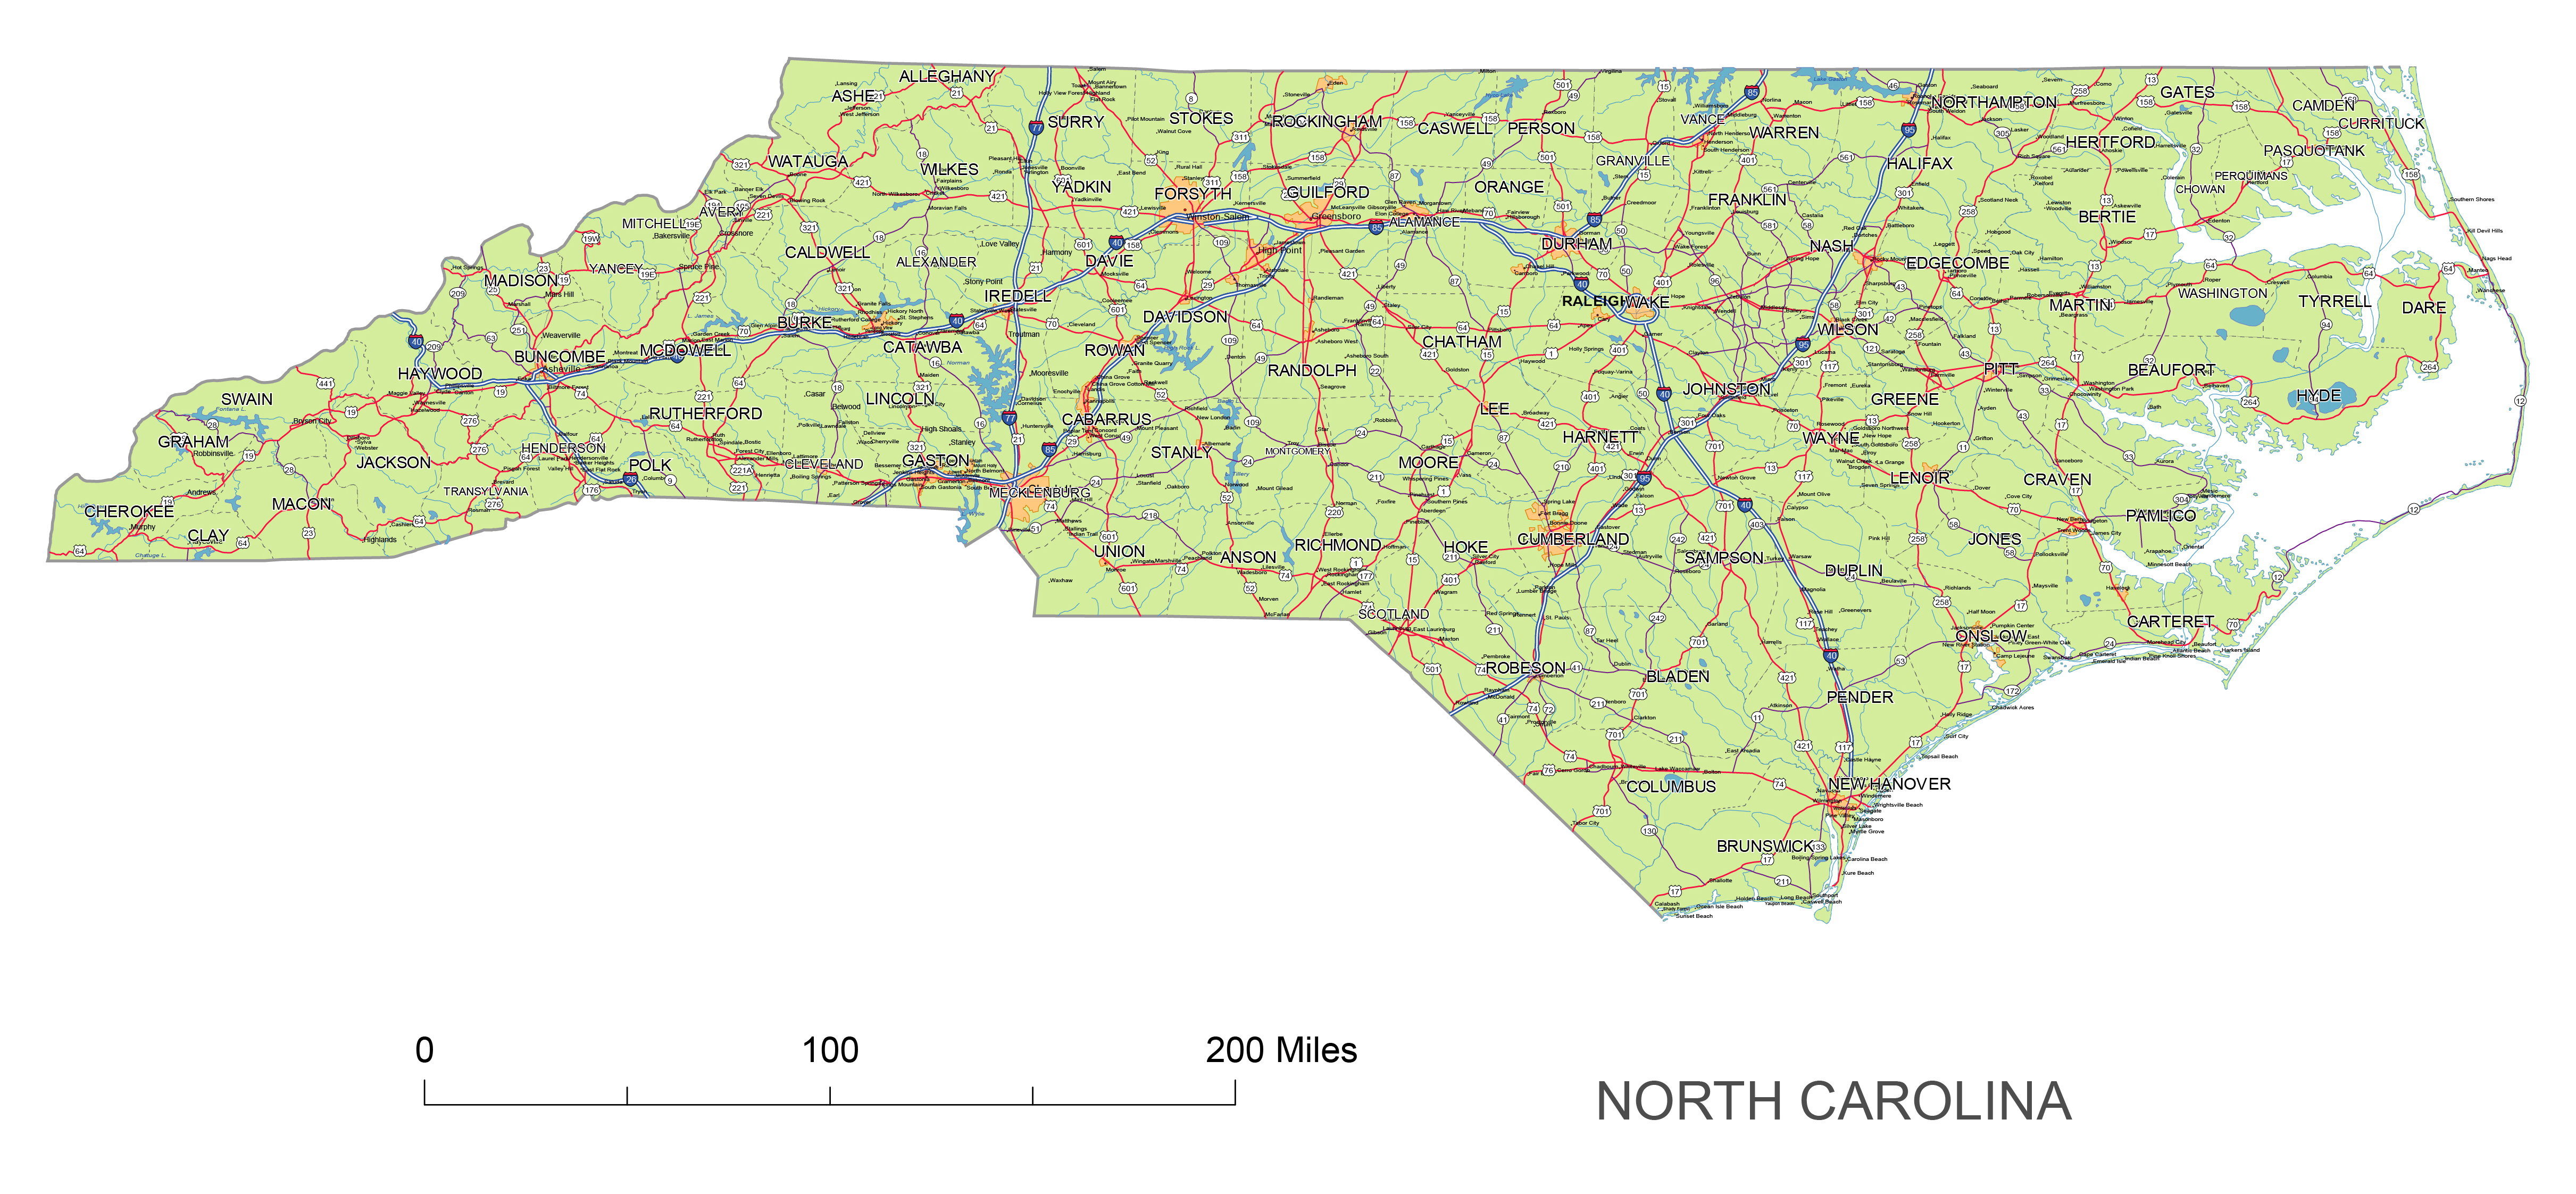 north-carolina-state-vector-road-map-a-map-of-nc-includes-interstates